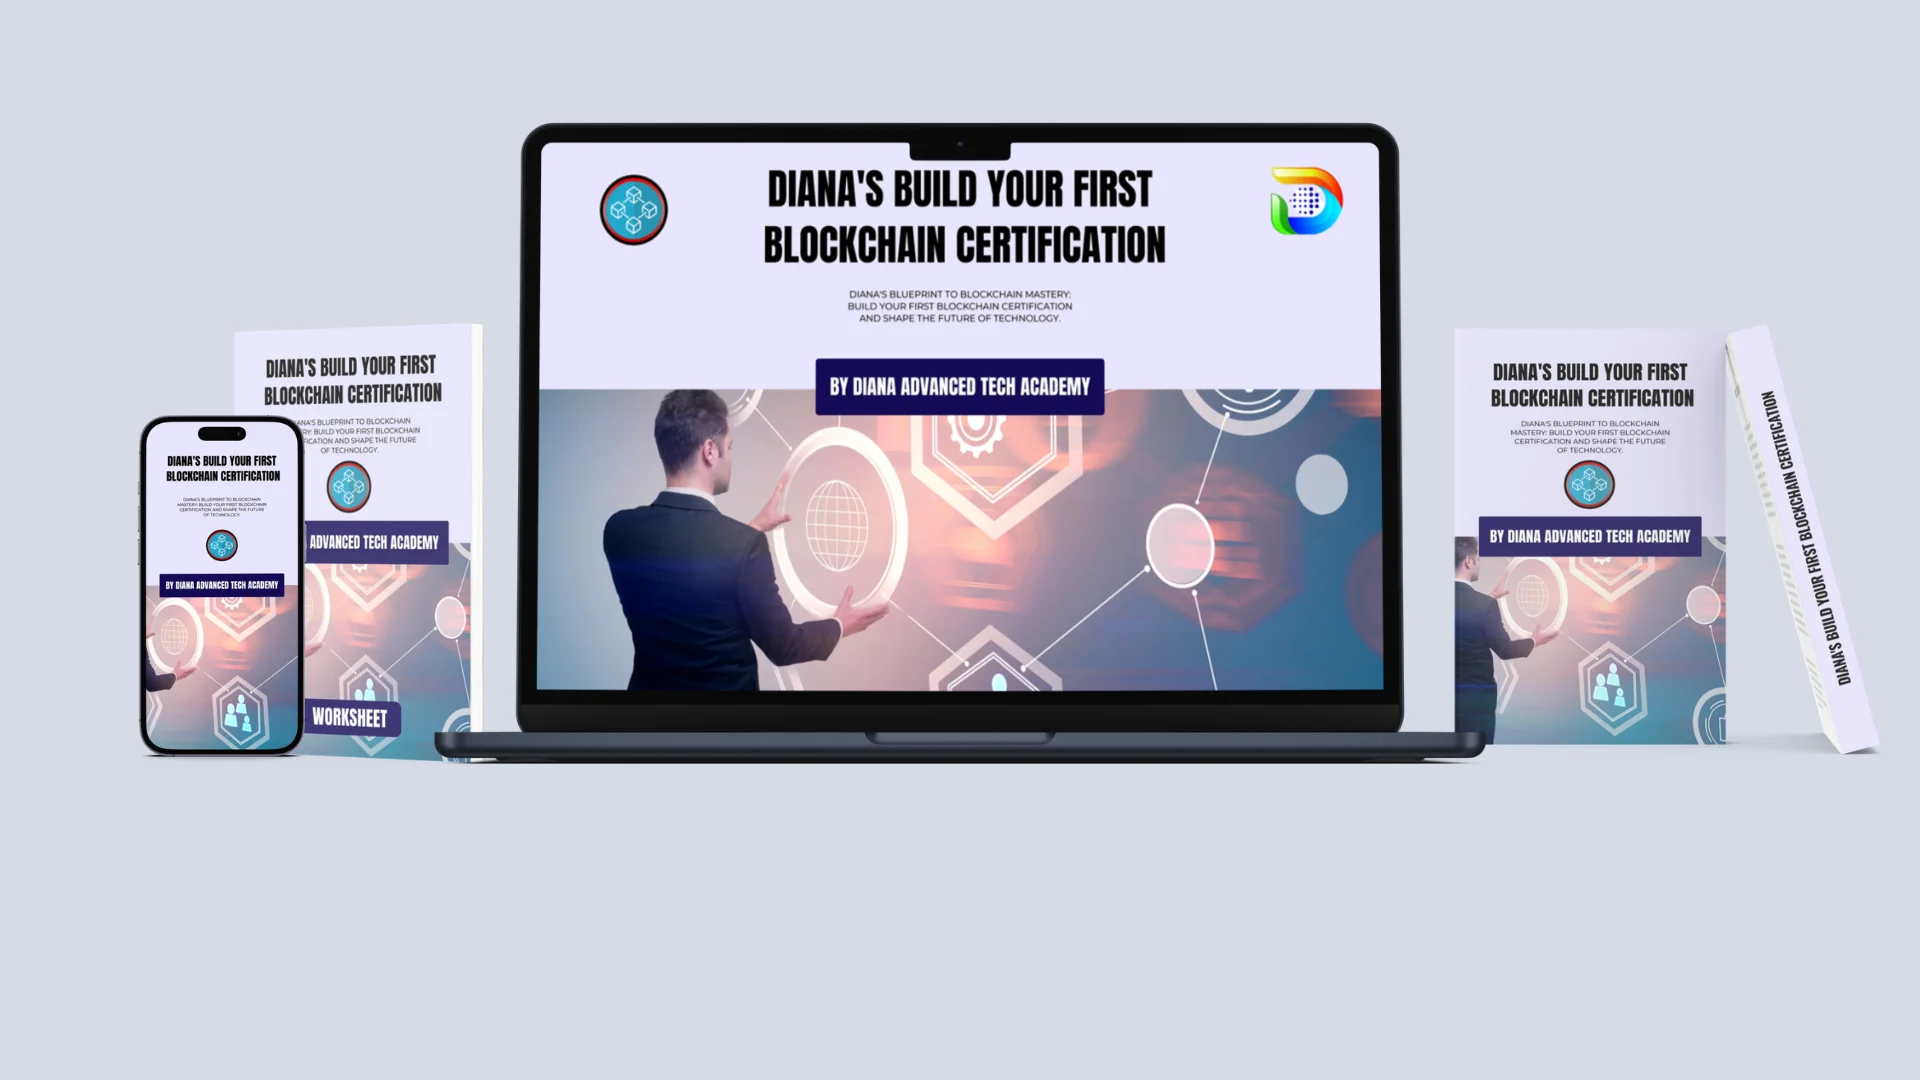 DIANA’S BUILD YOUR FIRST BLOCKCHAIN CERTIFICATION (DBYC)